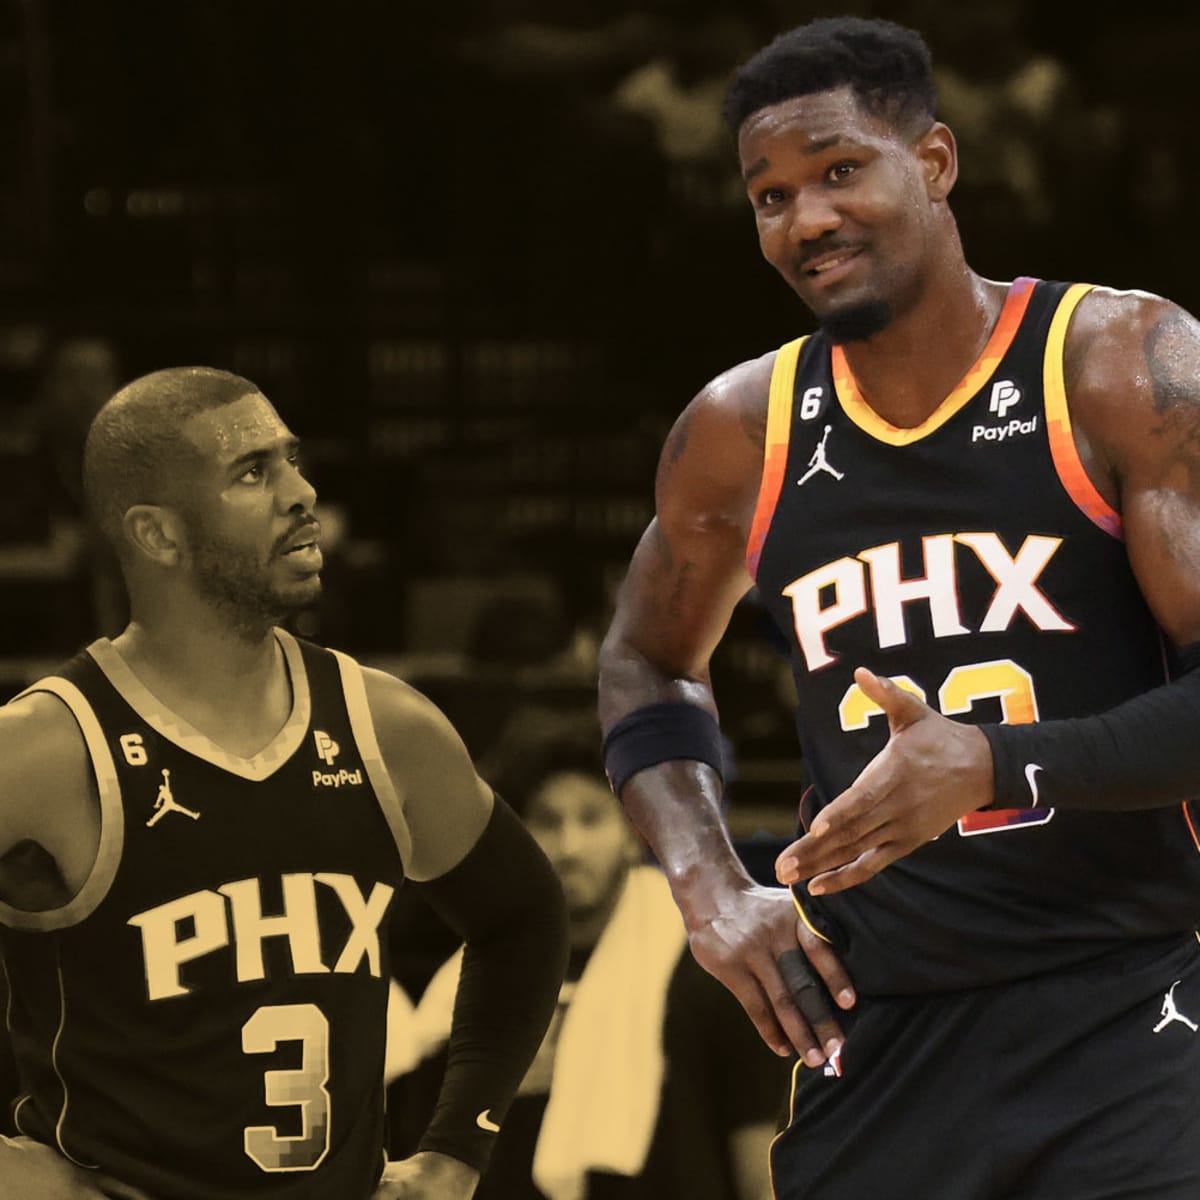 Deandre Ayton defines what NBA success looks like to him - Basketball  Network - Your daily dose of basketball